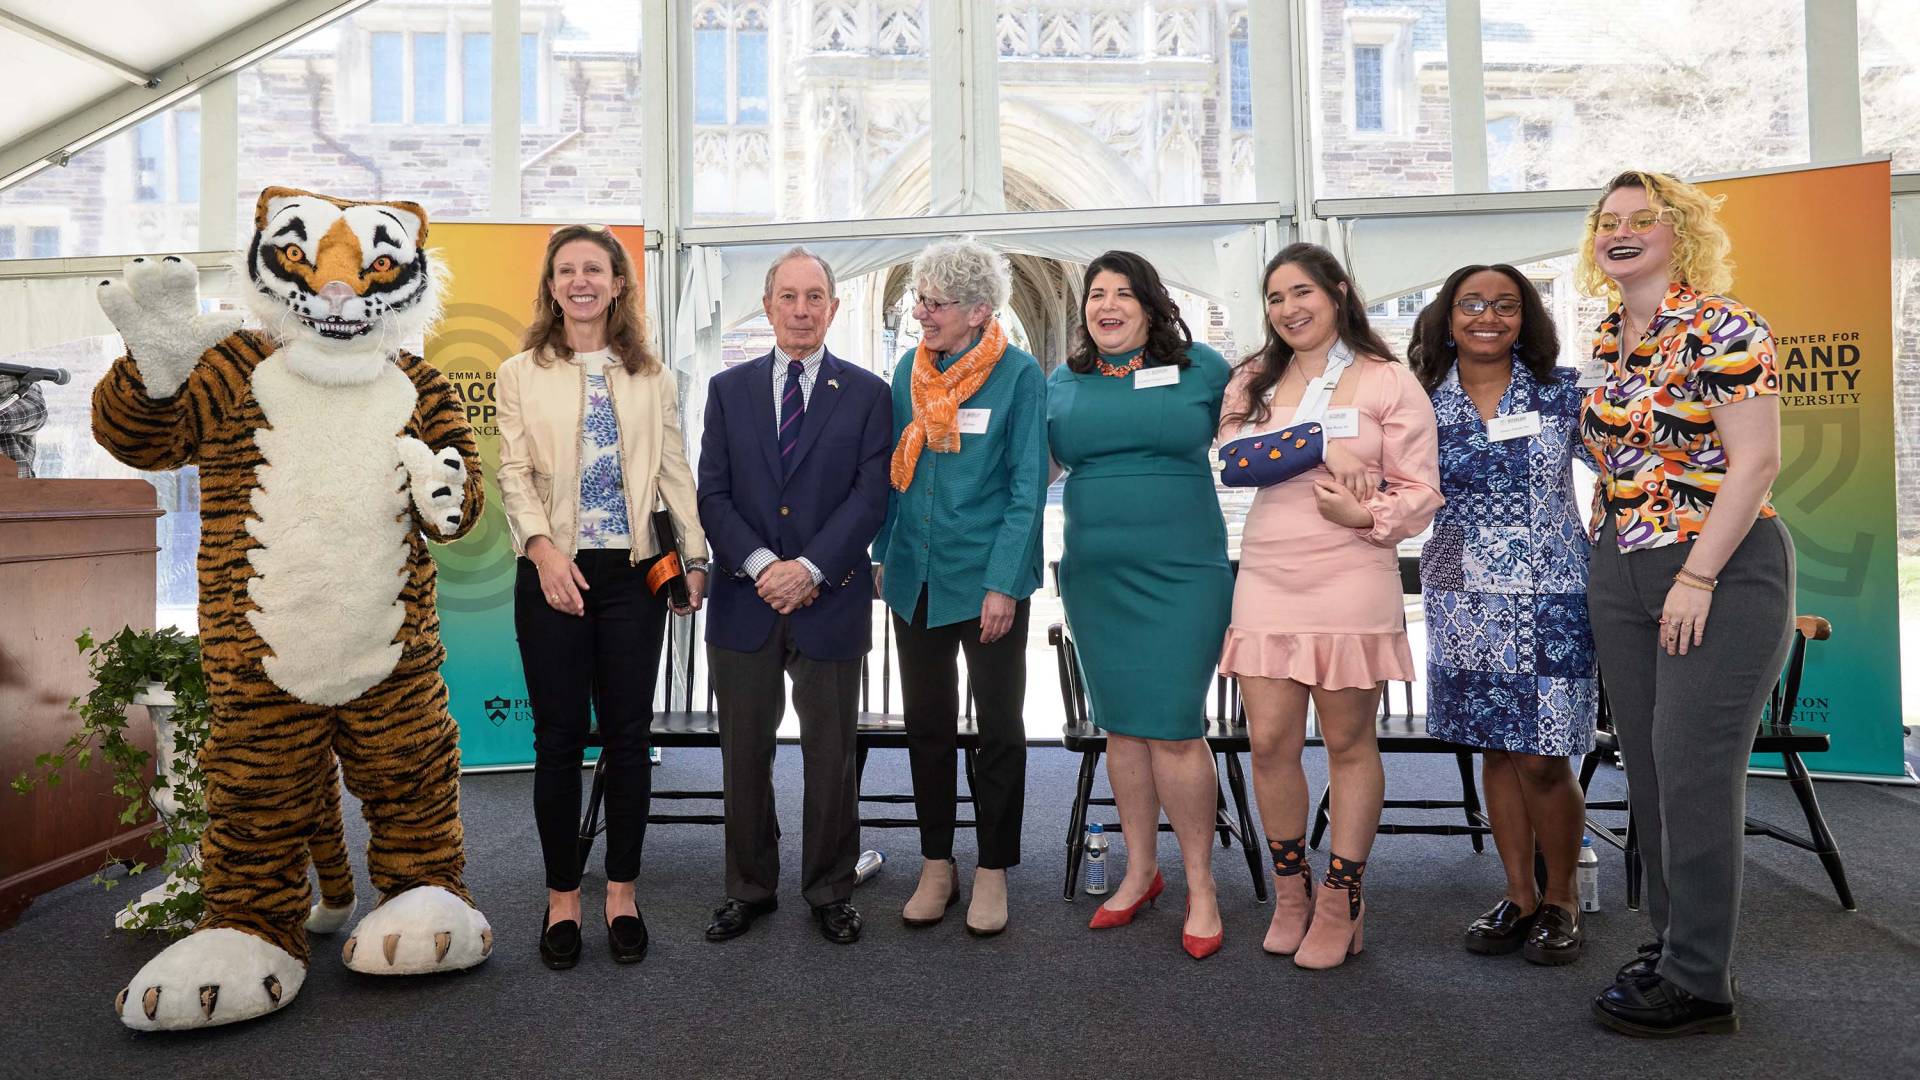 Princeton celebrates the Emma Bloomberg Center for Access and Opportunity and programs supporting first-gen, lower-income, veteran and transfer students image photo photo